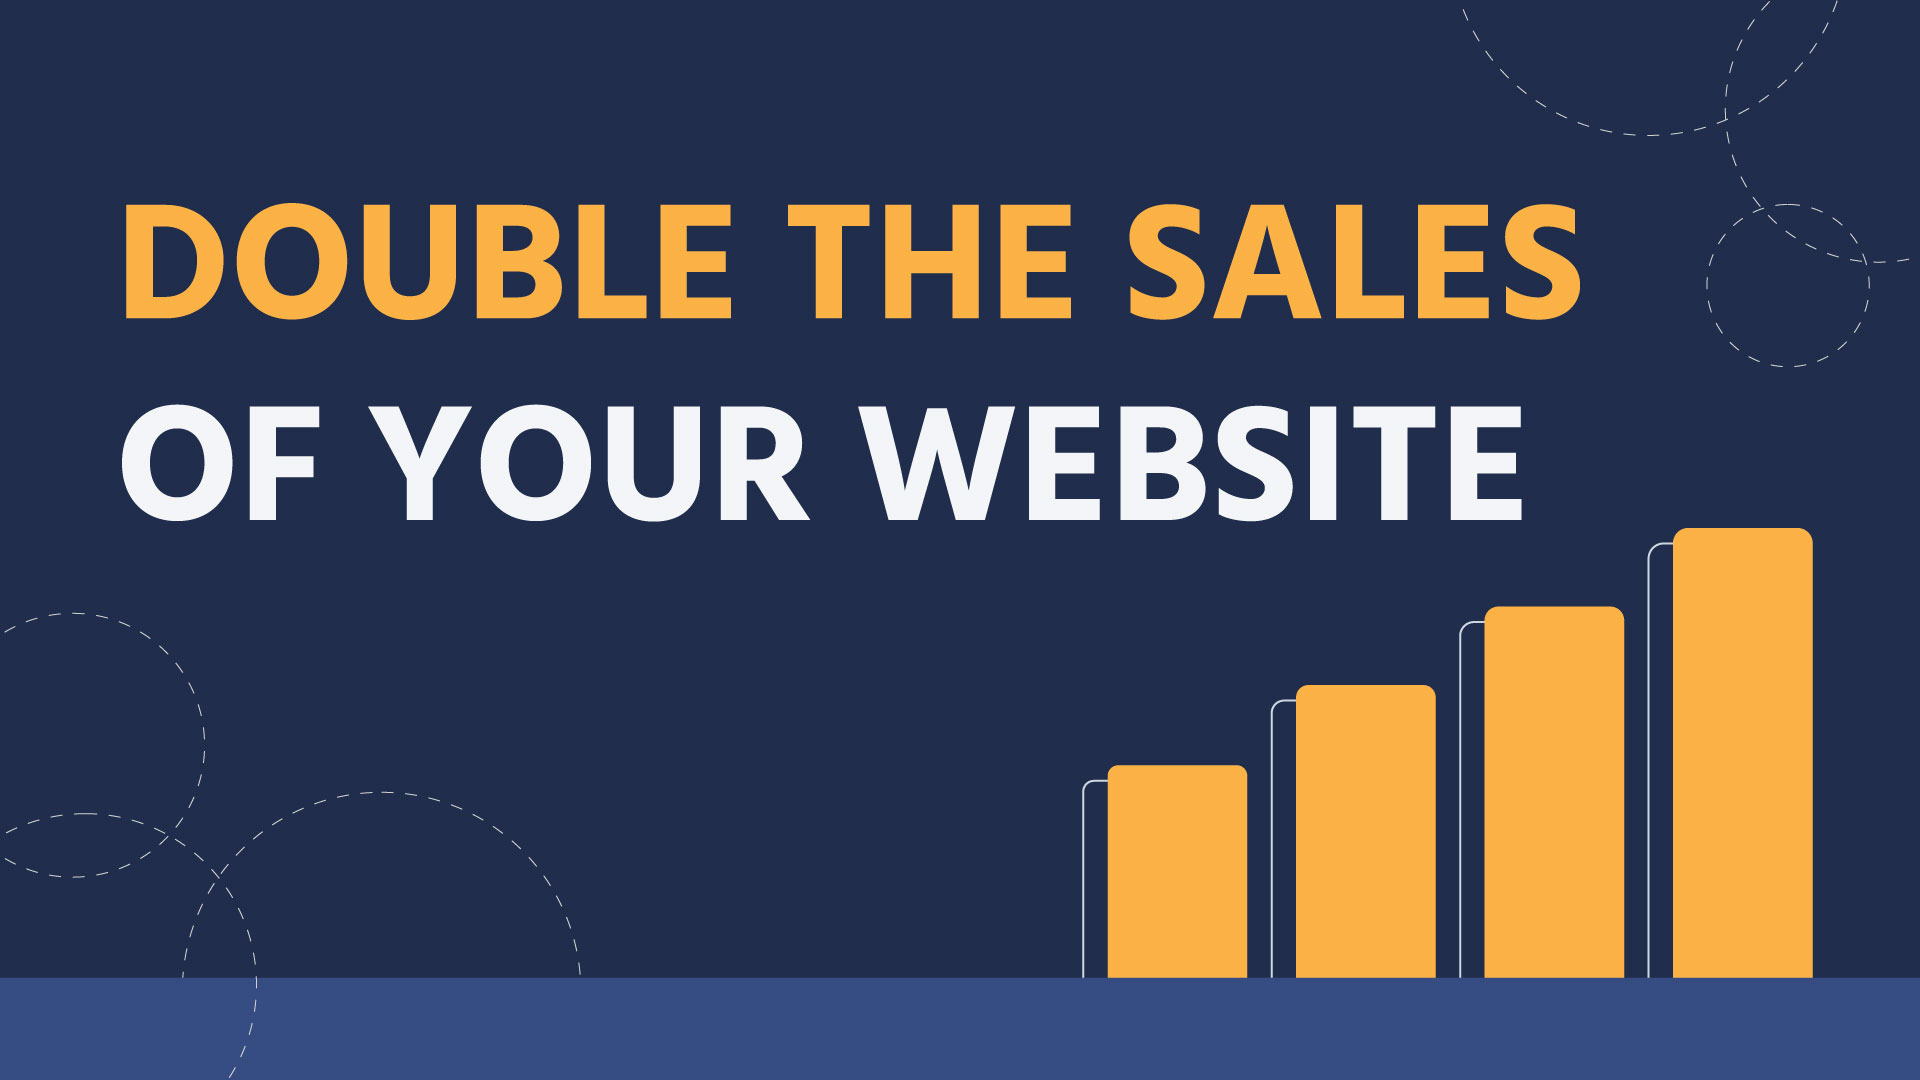 Double the sales of your website